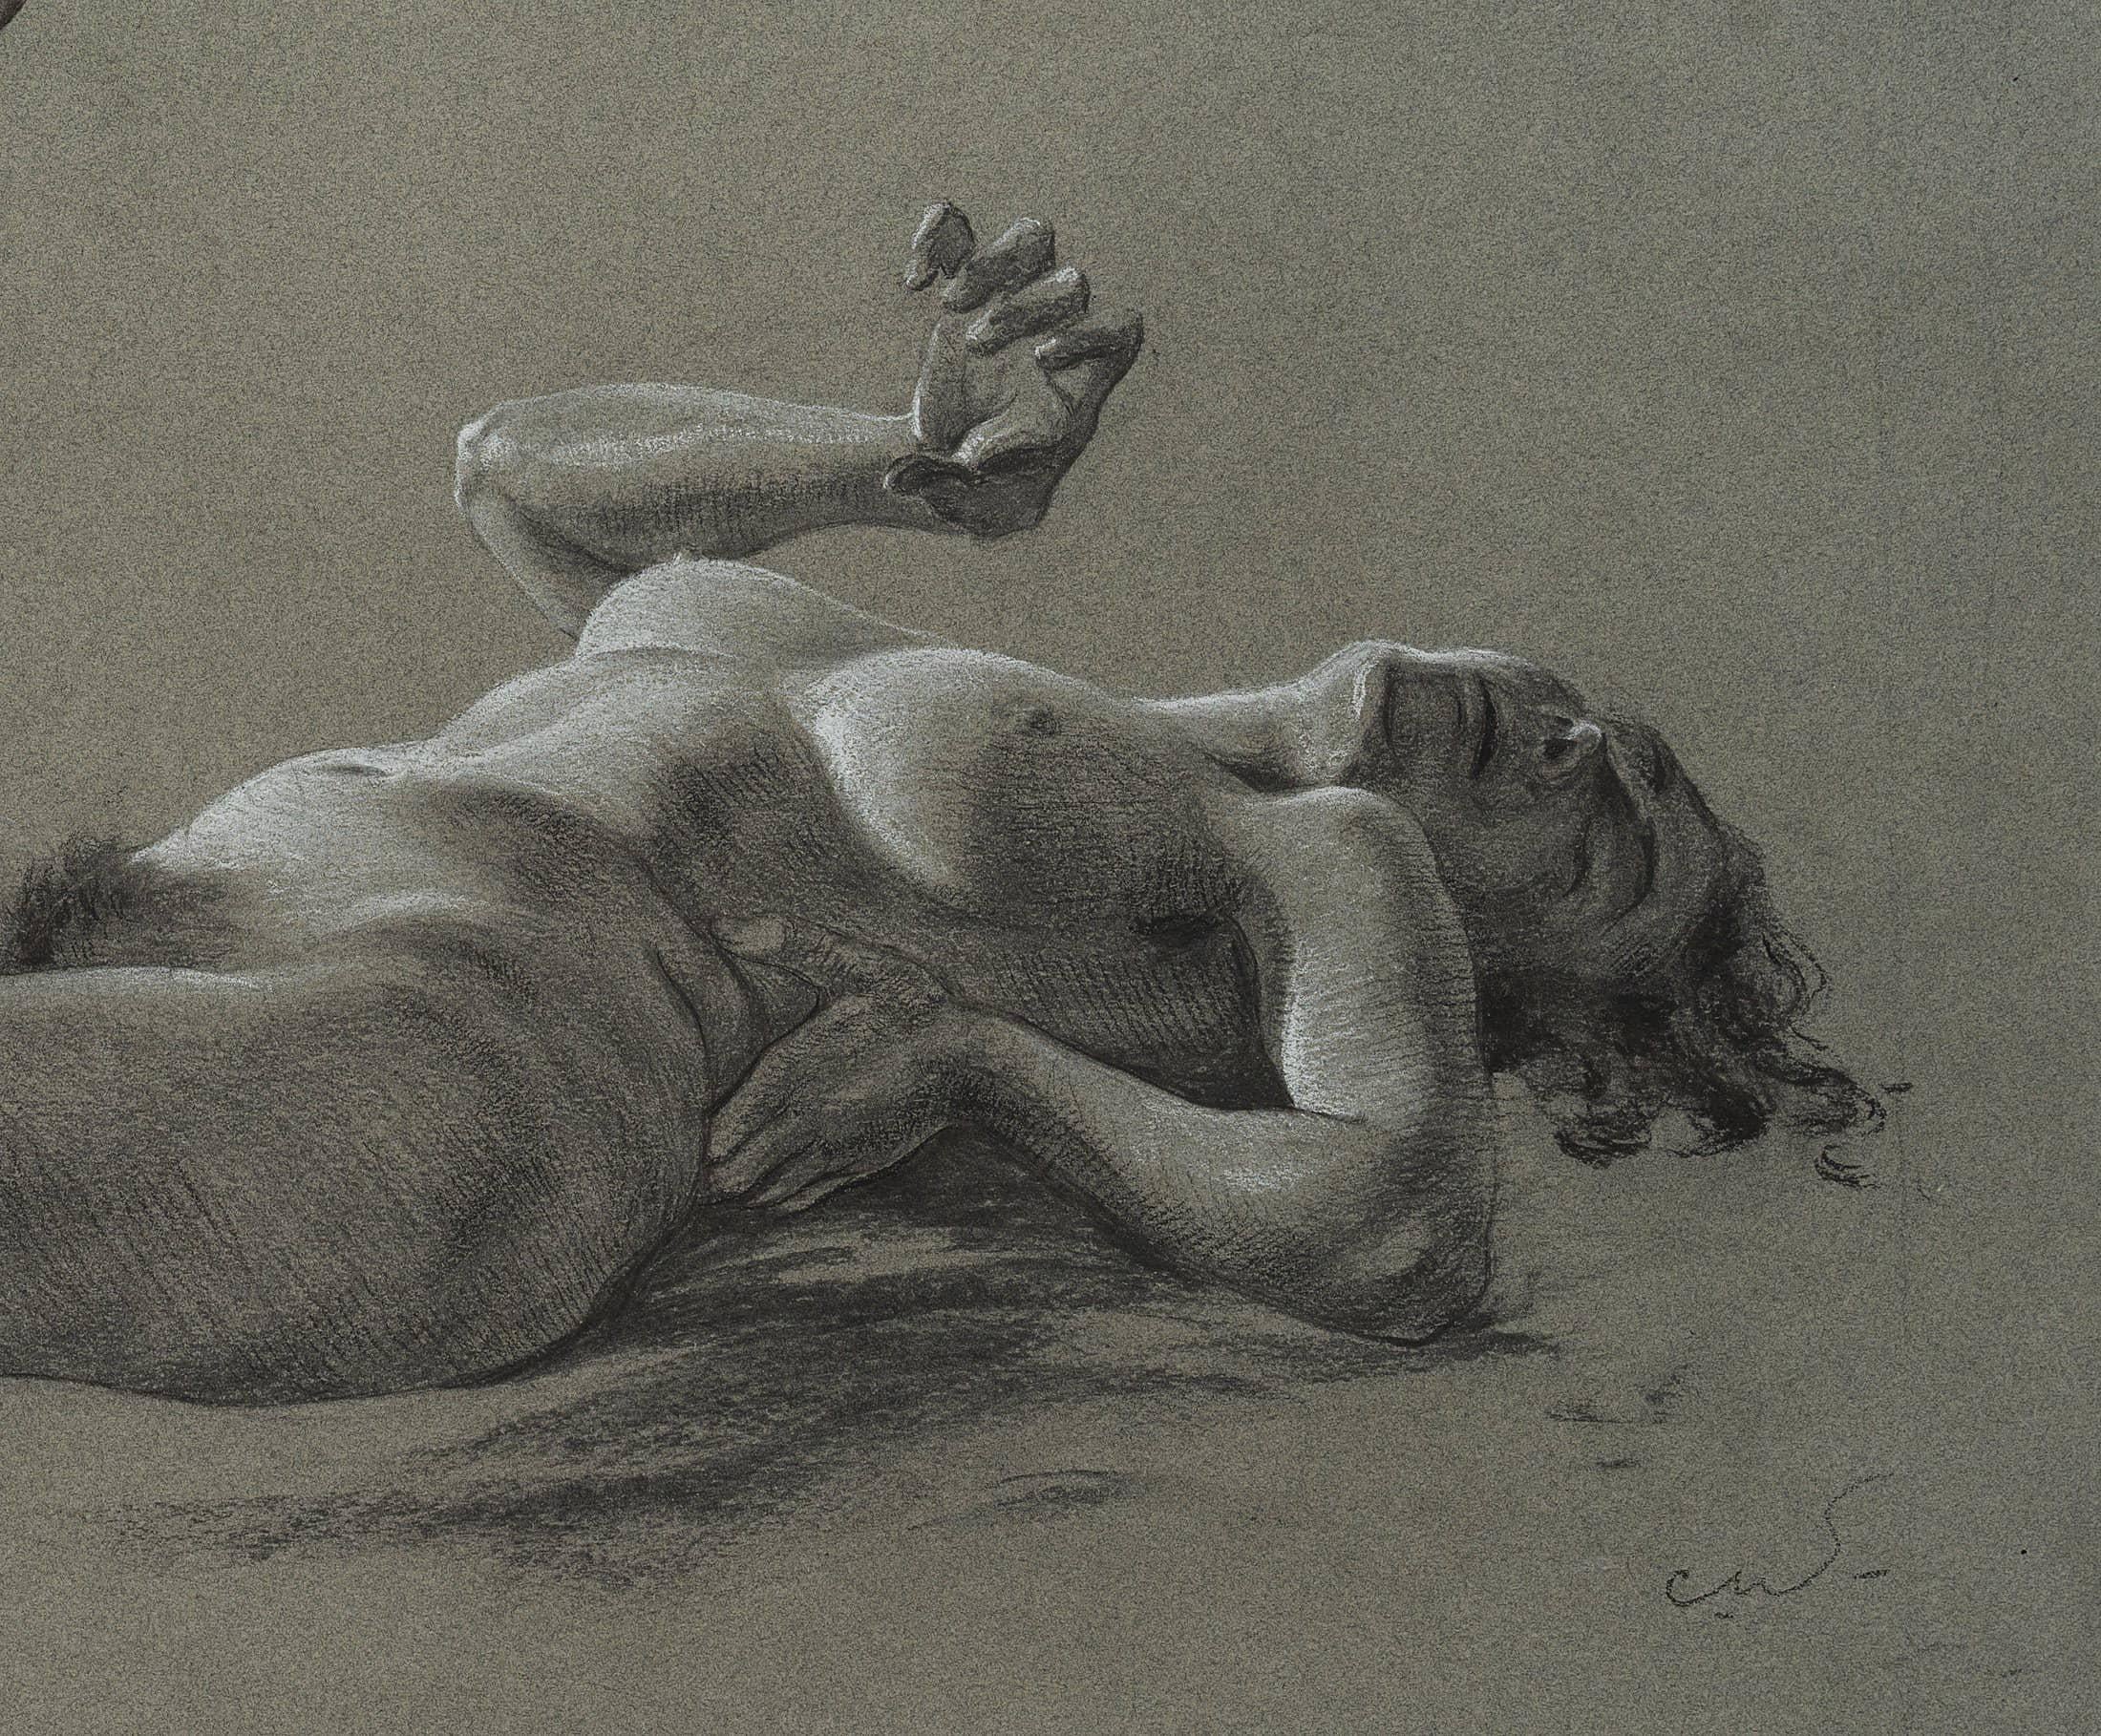 Reclining female nude - Art by Carl August Walther